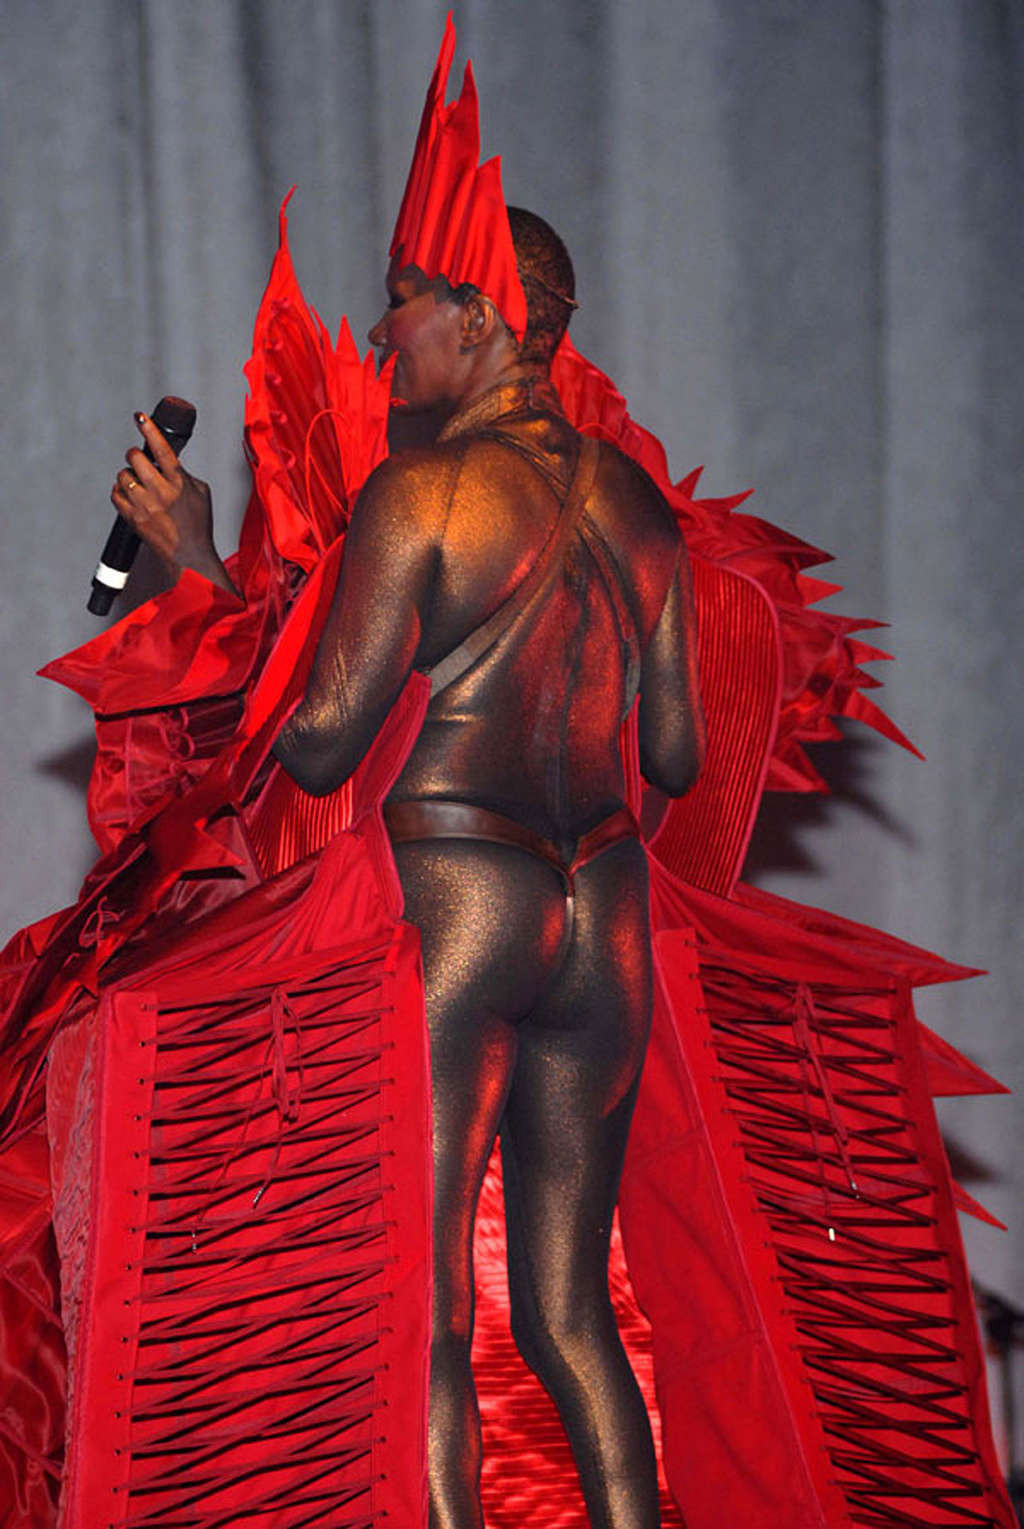 Grace Jones tits slip and upskirt on stage paparazzi pictures #75359763